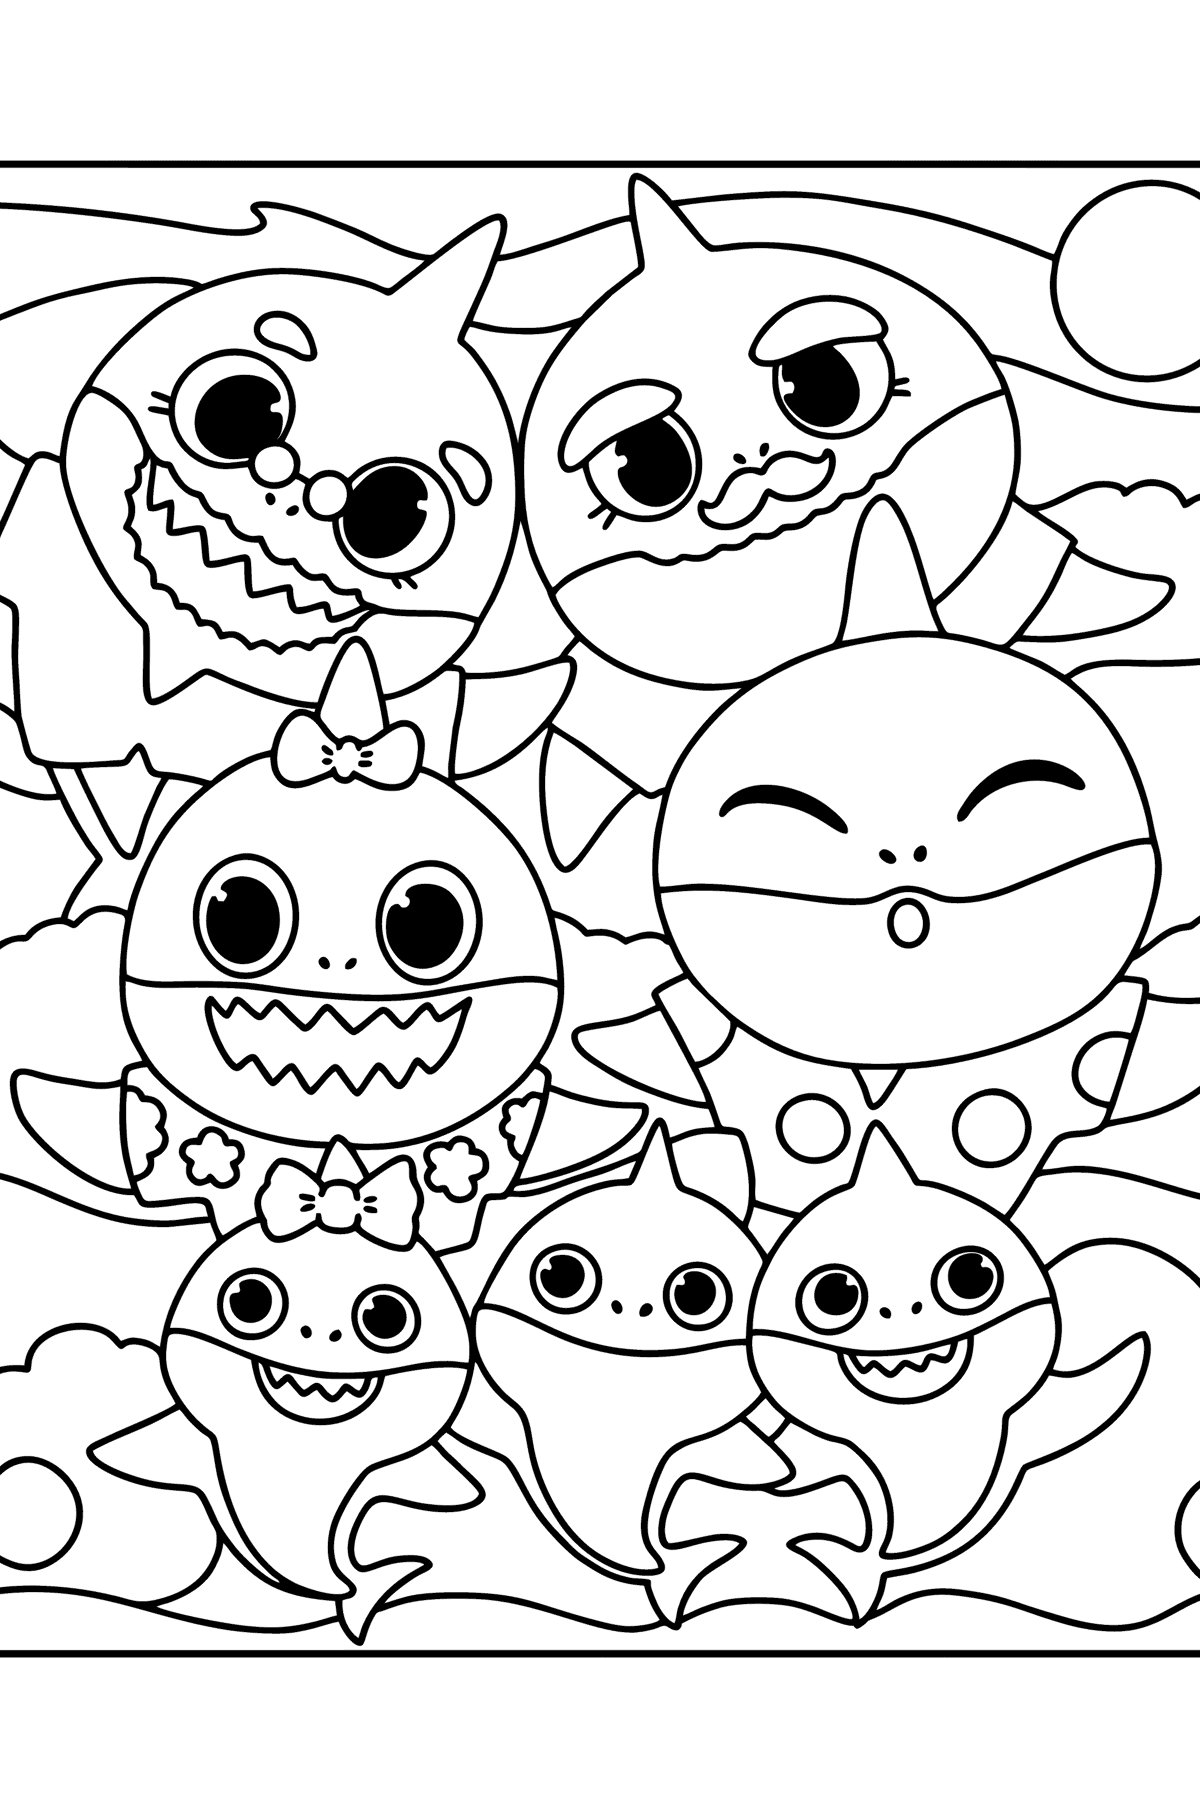 Baby shark Cute Family coloring page - Coloring Pages for Kids